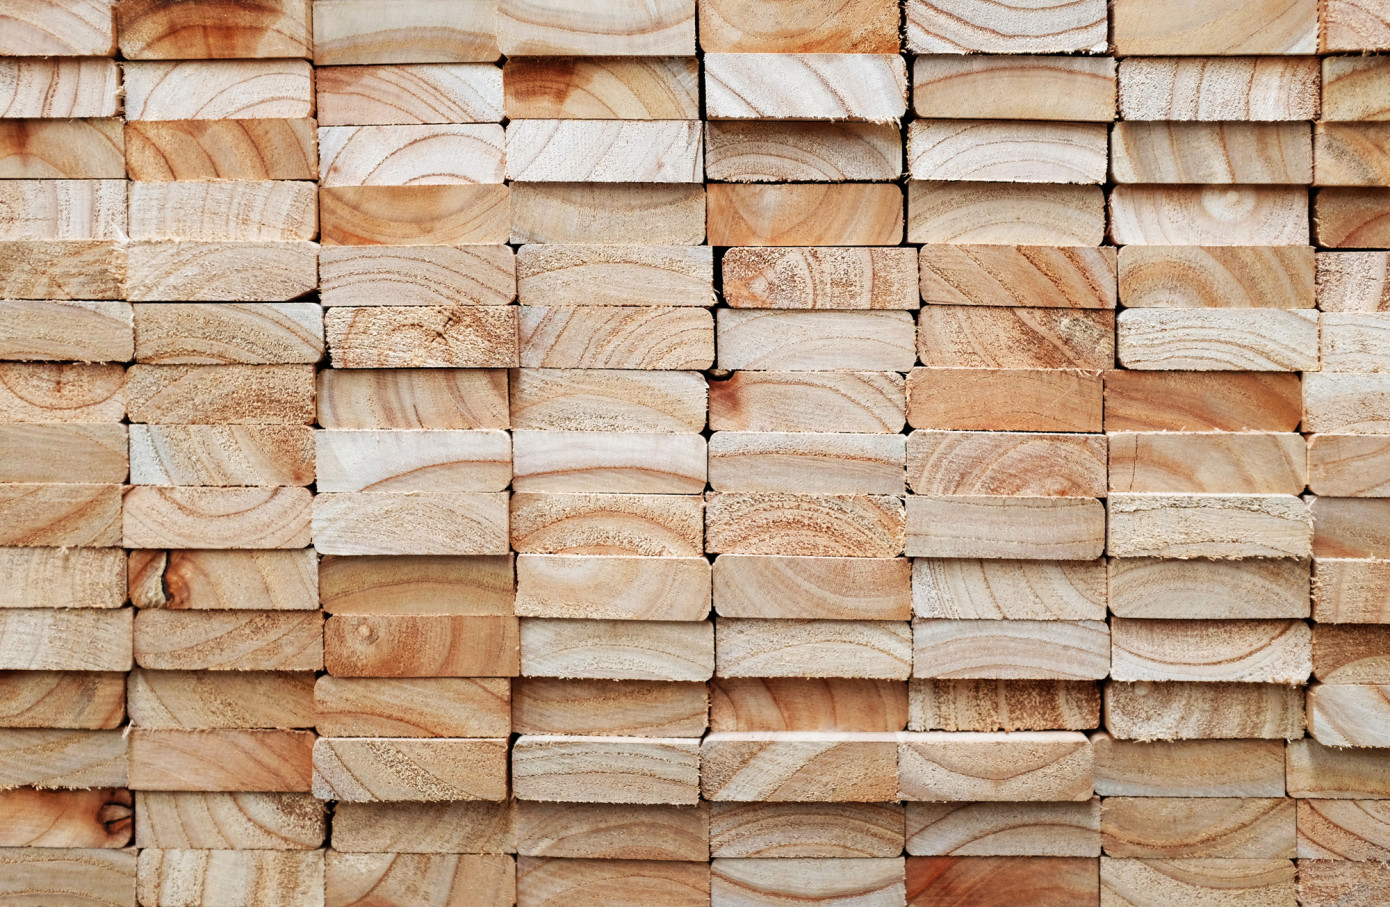 U.S. exports of hardwood lumber expand 12% in first half of 2022